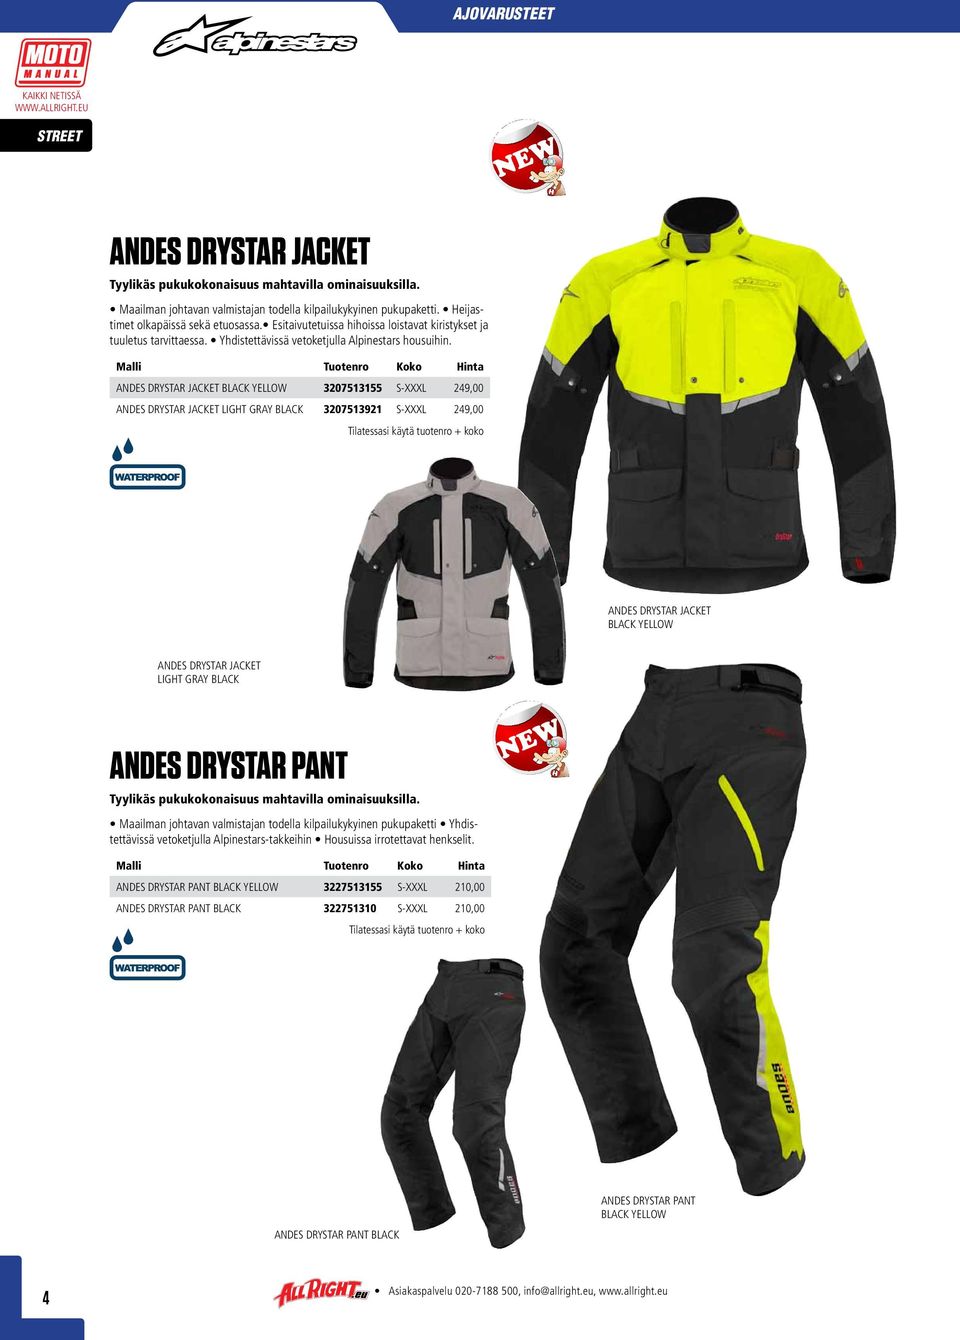 ANDES DRYSTAR JACKET BLACK YELLOW 3207513155 S-XXXL 249,00 ANDES DRYSTAR JACKET LIGHT GRAY BLACK 3207513921 S-XXXL 249,00 ANDES DRYSTAR JACKET BLACK YELLOW ANDES DRYSTAR JACKET LIGHT GRAY BLACK ANDES